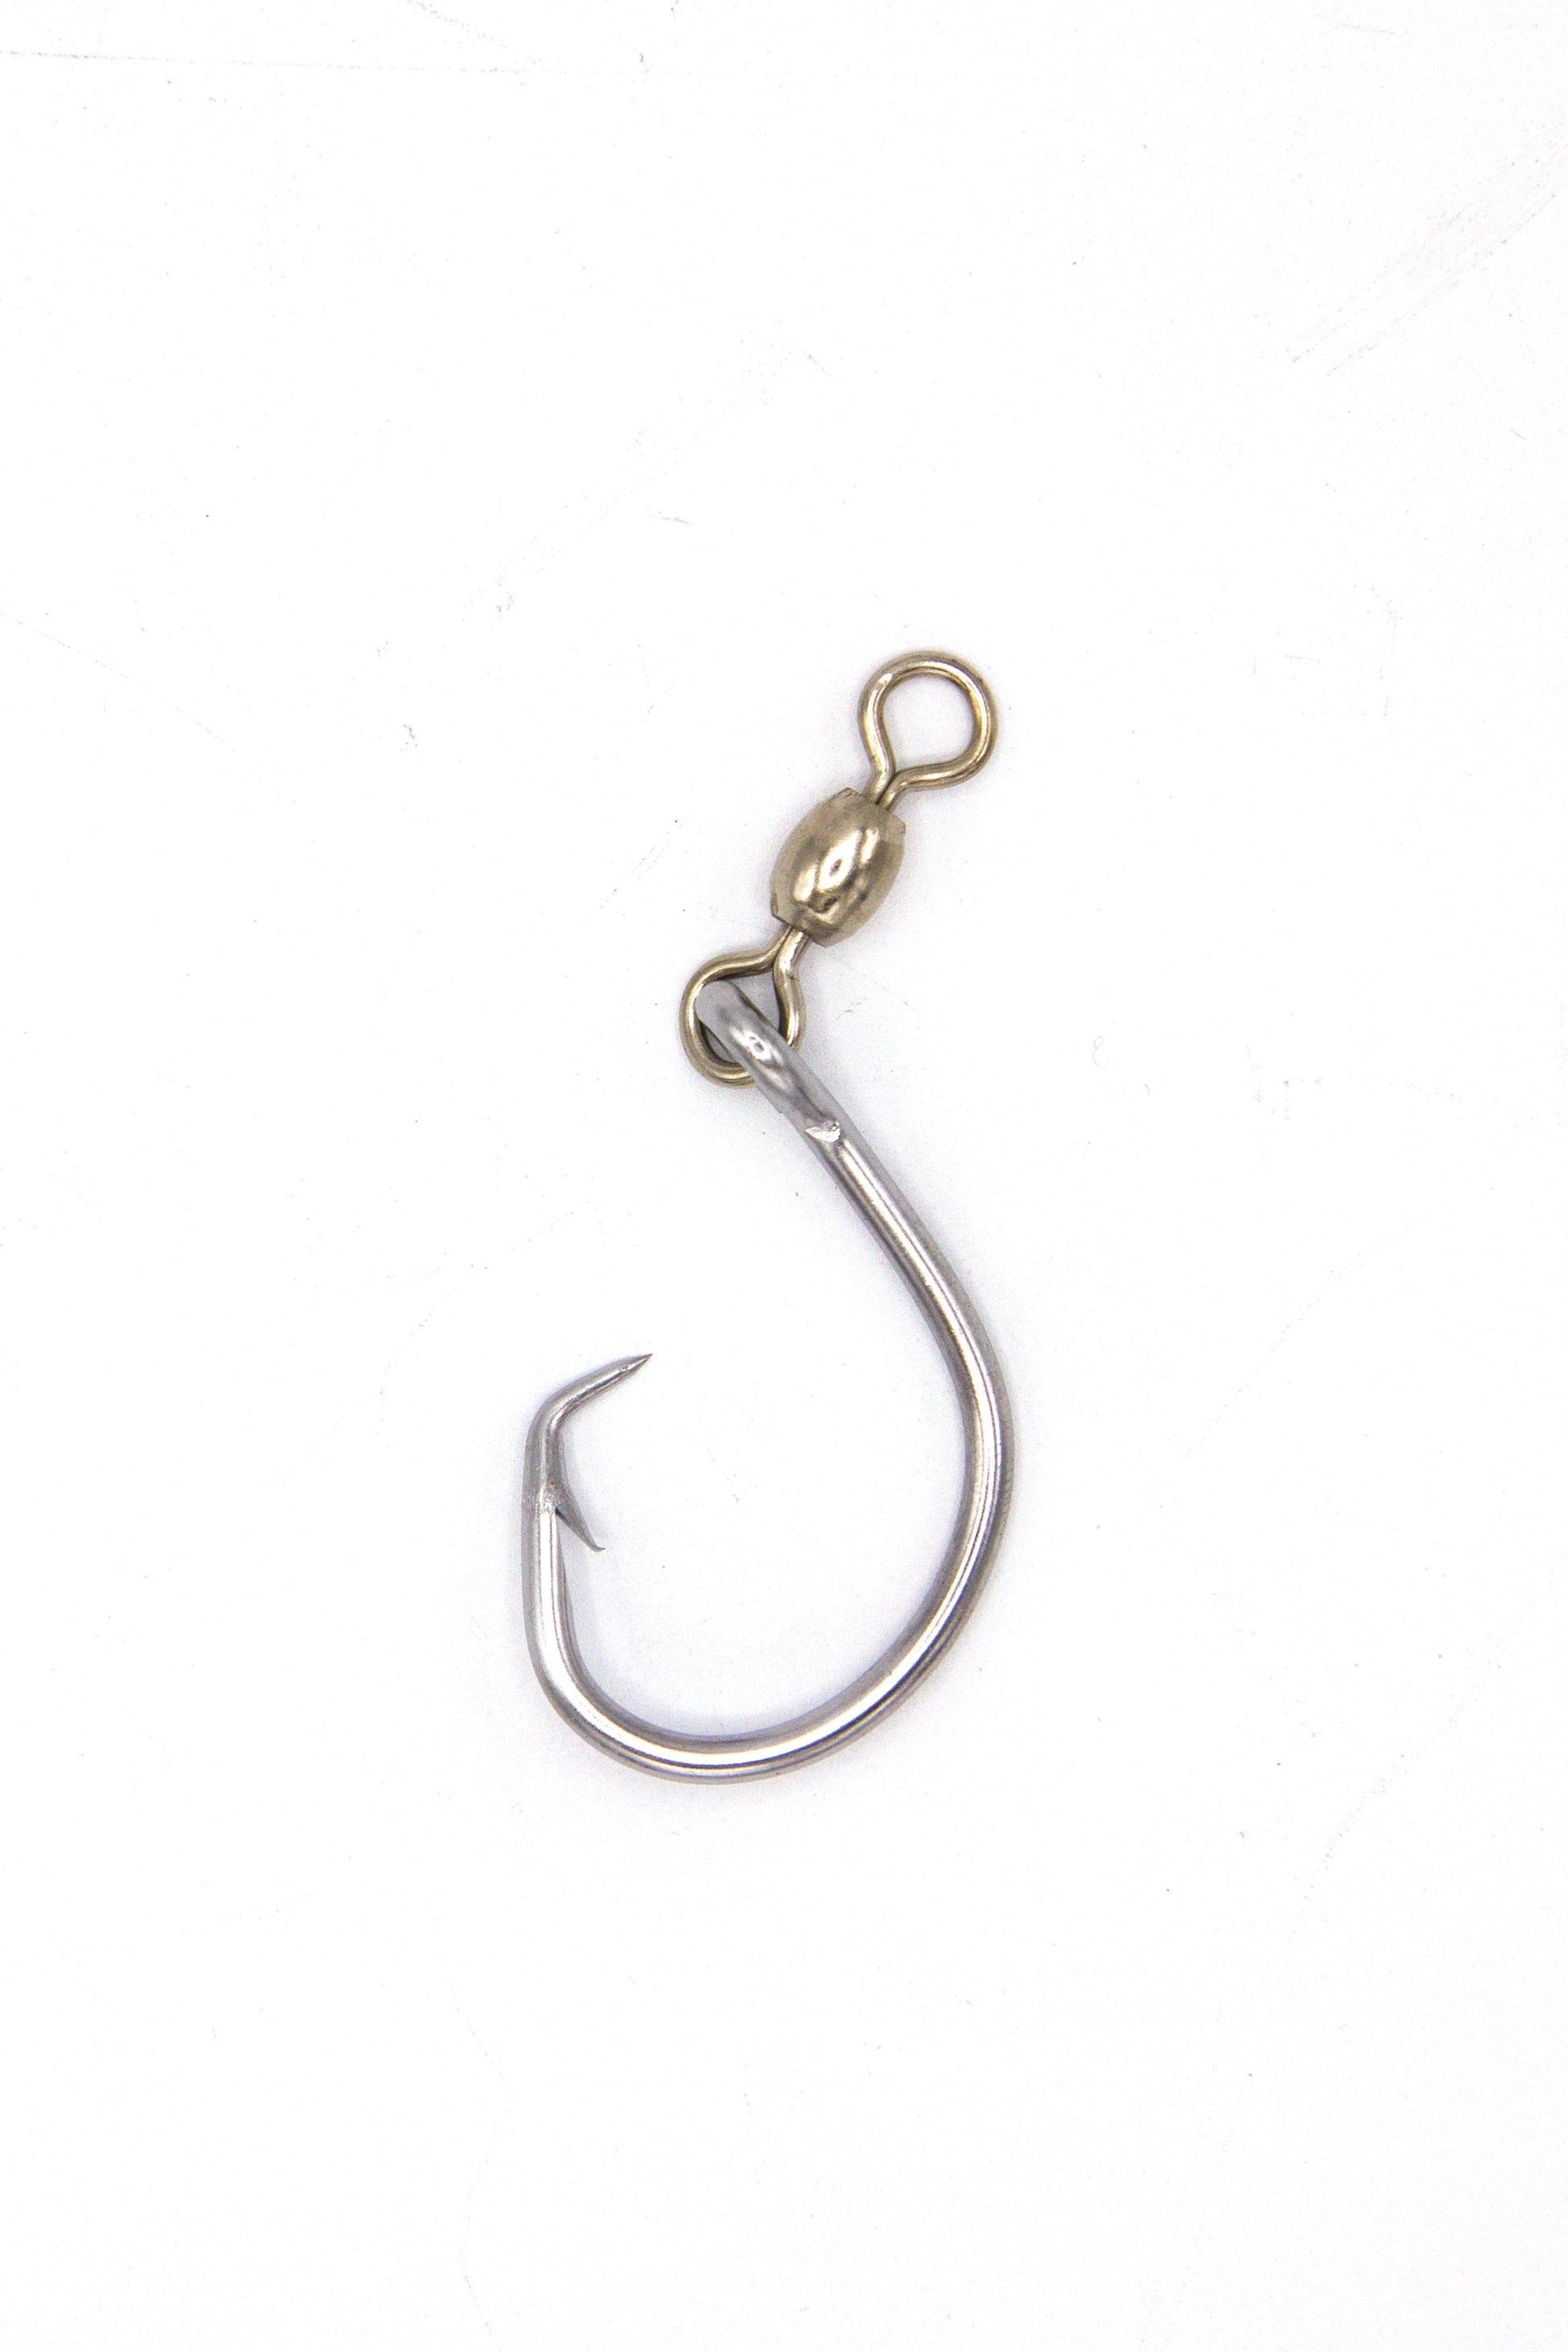 Max-Catch 12/0 Stainless Steel Circle Hooks, 12 0 Circle Hooks